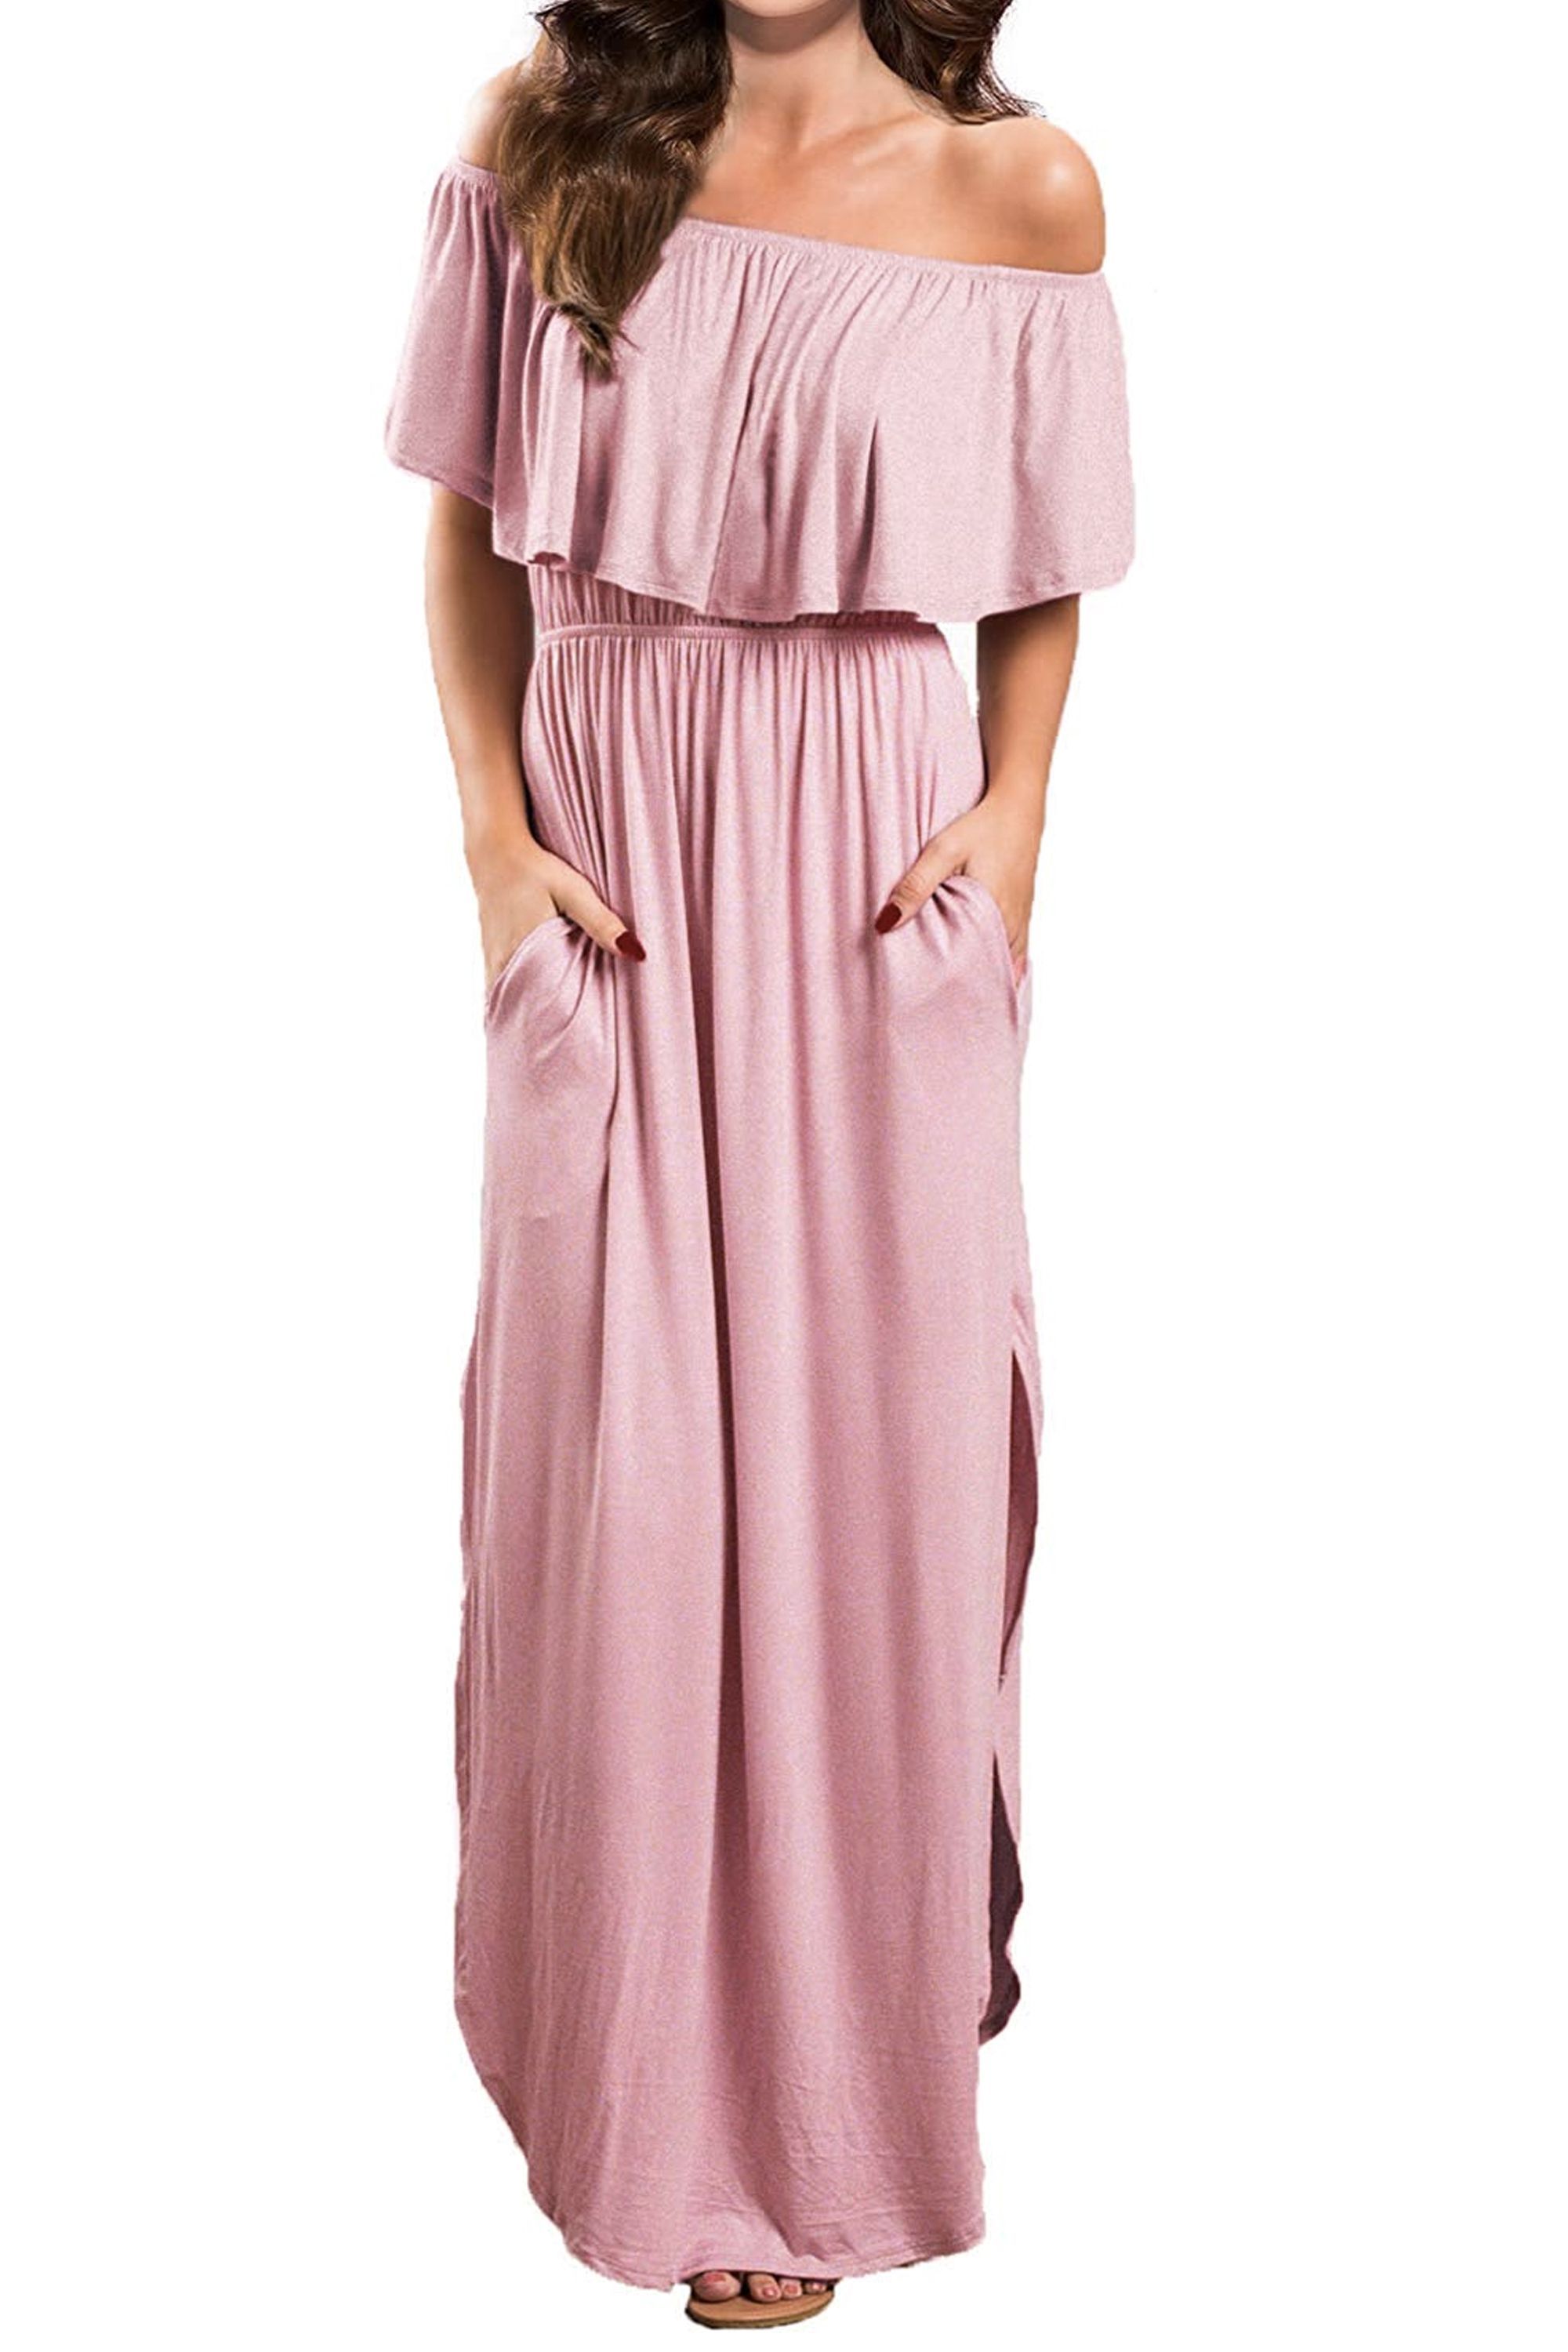 You Need to Add This $39 Maxi Dress to Your Summer Wardrobe - Amazon Maxi  Dresses